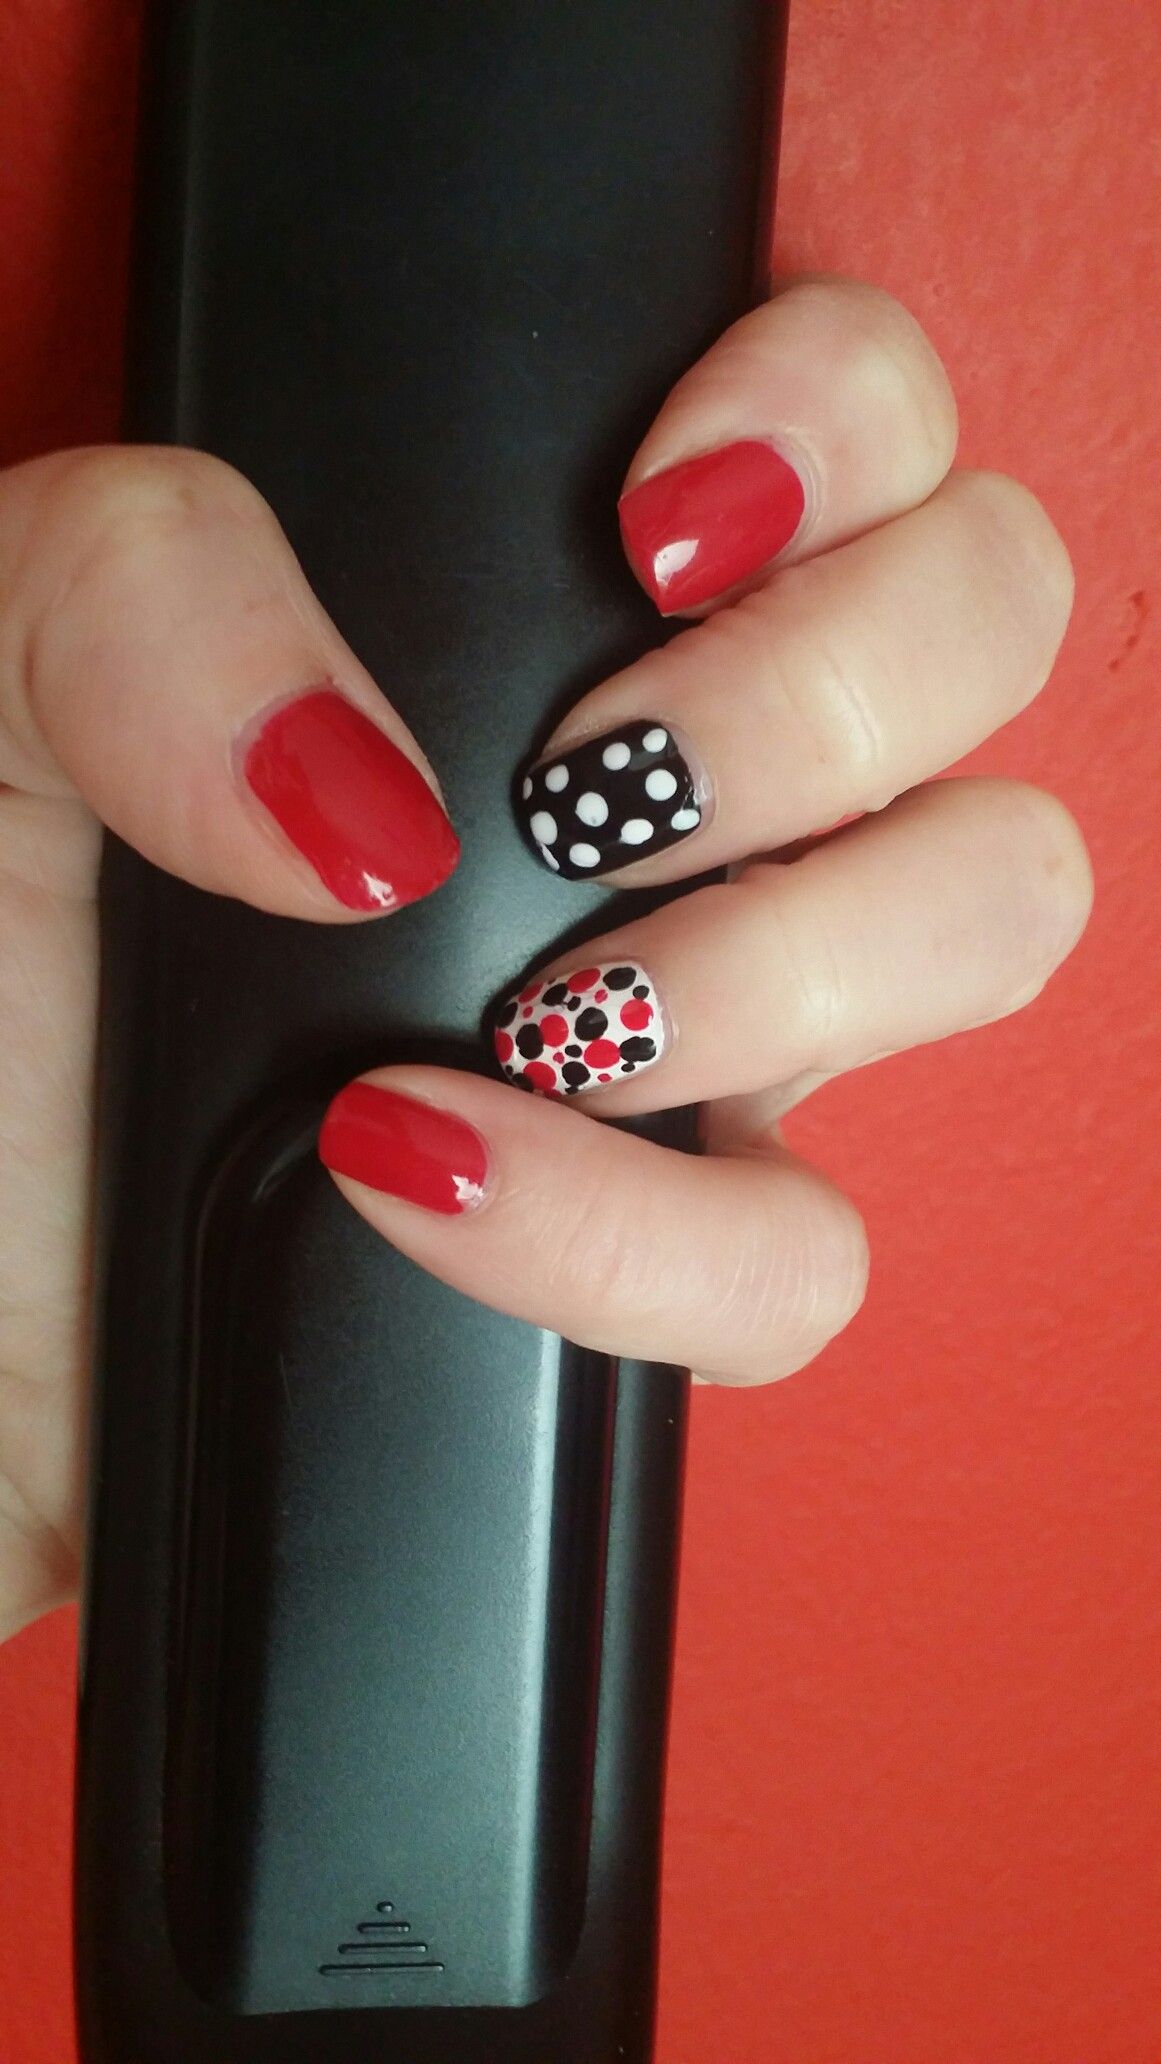 Red & Black Polka Dots With Crafty Ring Finger